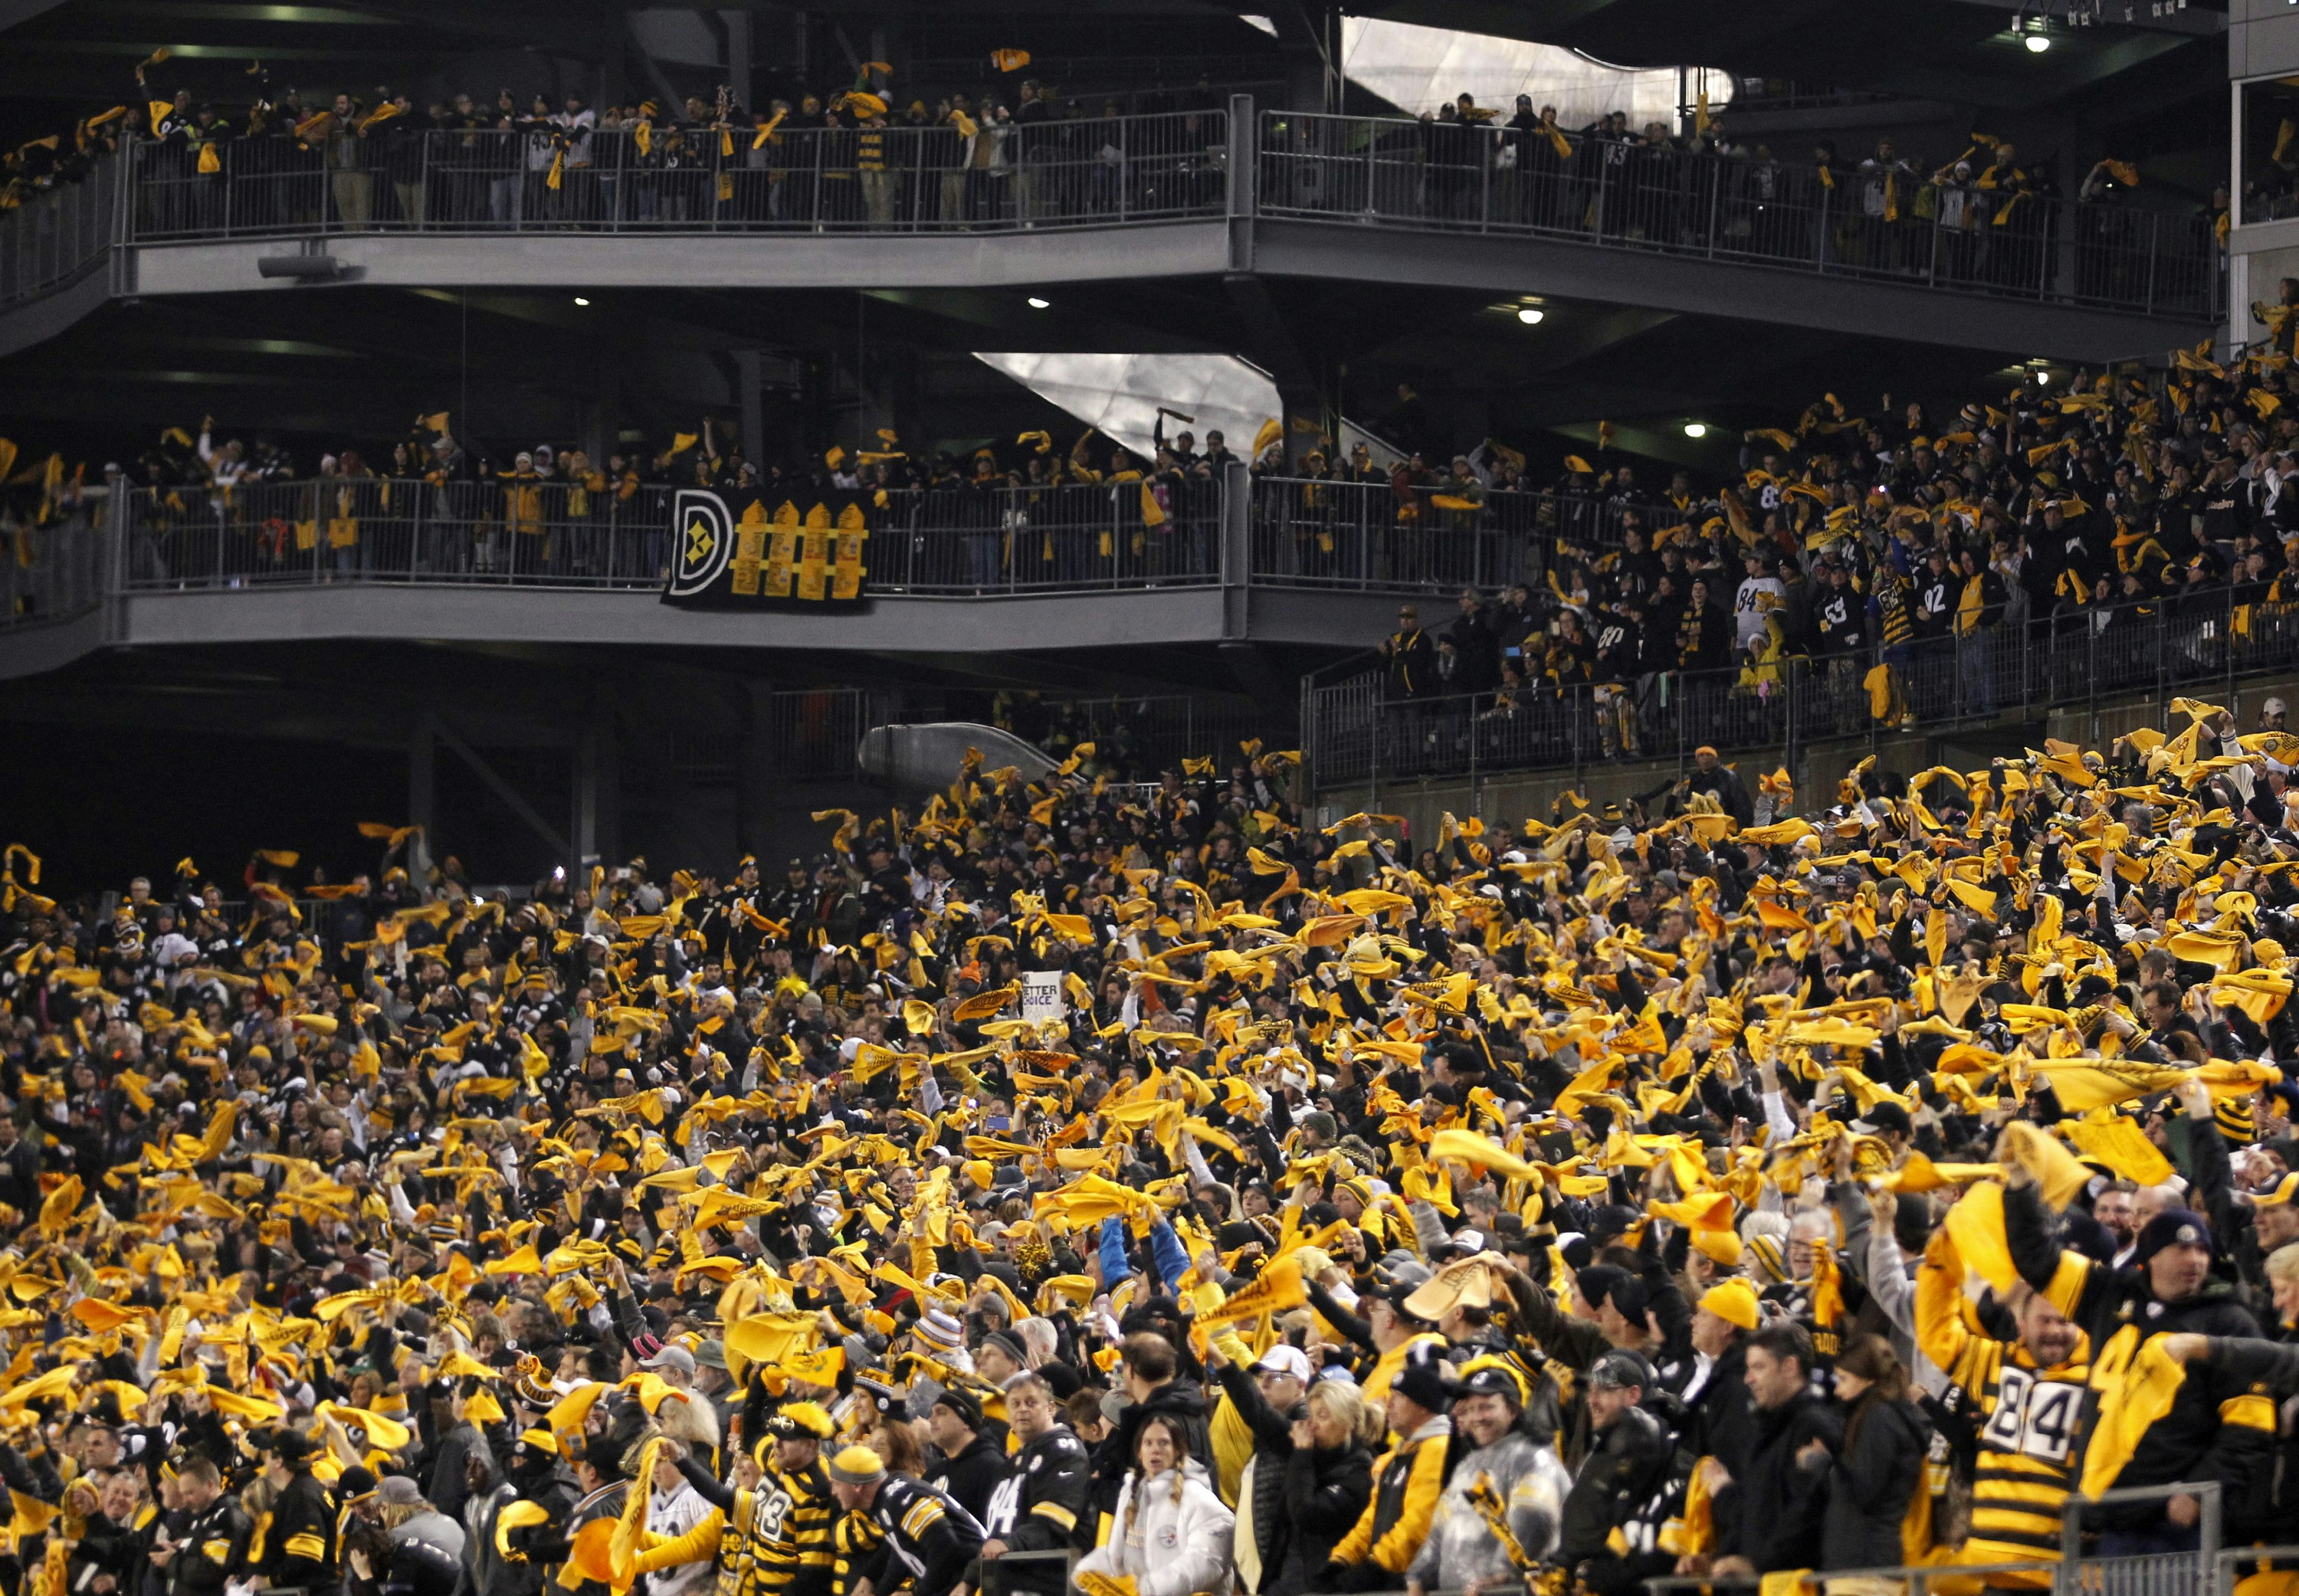 A stadium filled with Steeler fans wave their terrible towels during an NFL football game at Heinz Field in Pittsburgh, Pennsylvania.